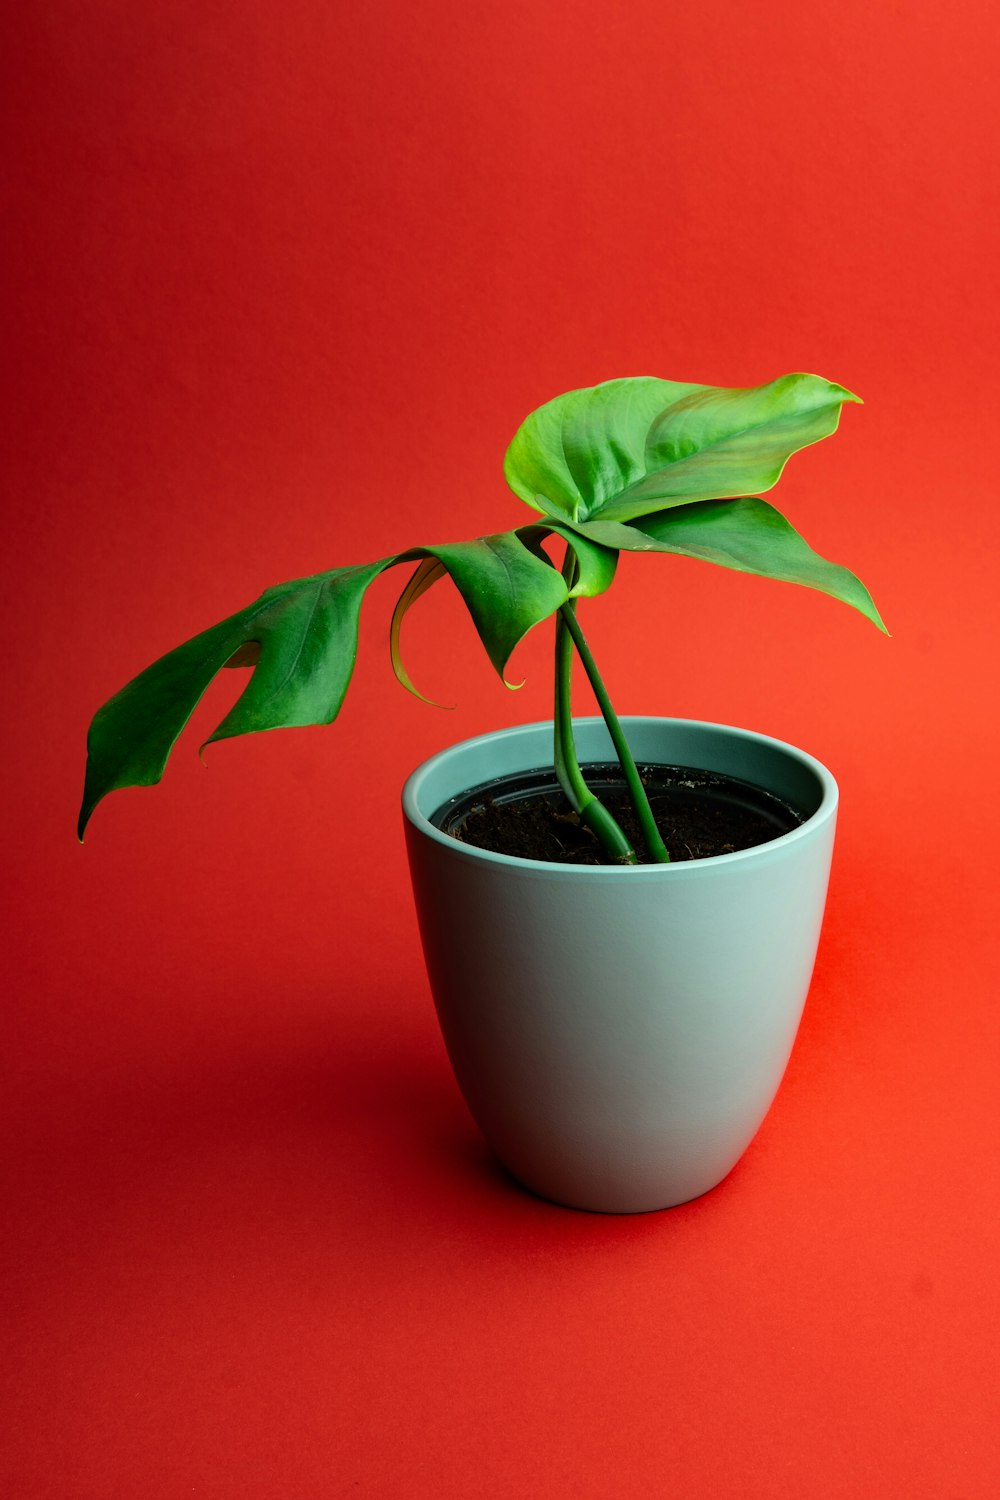 a green plant in a white bowl on a red background